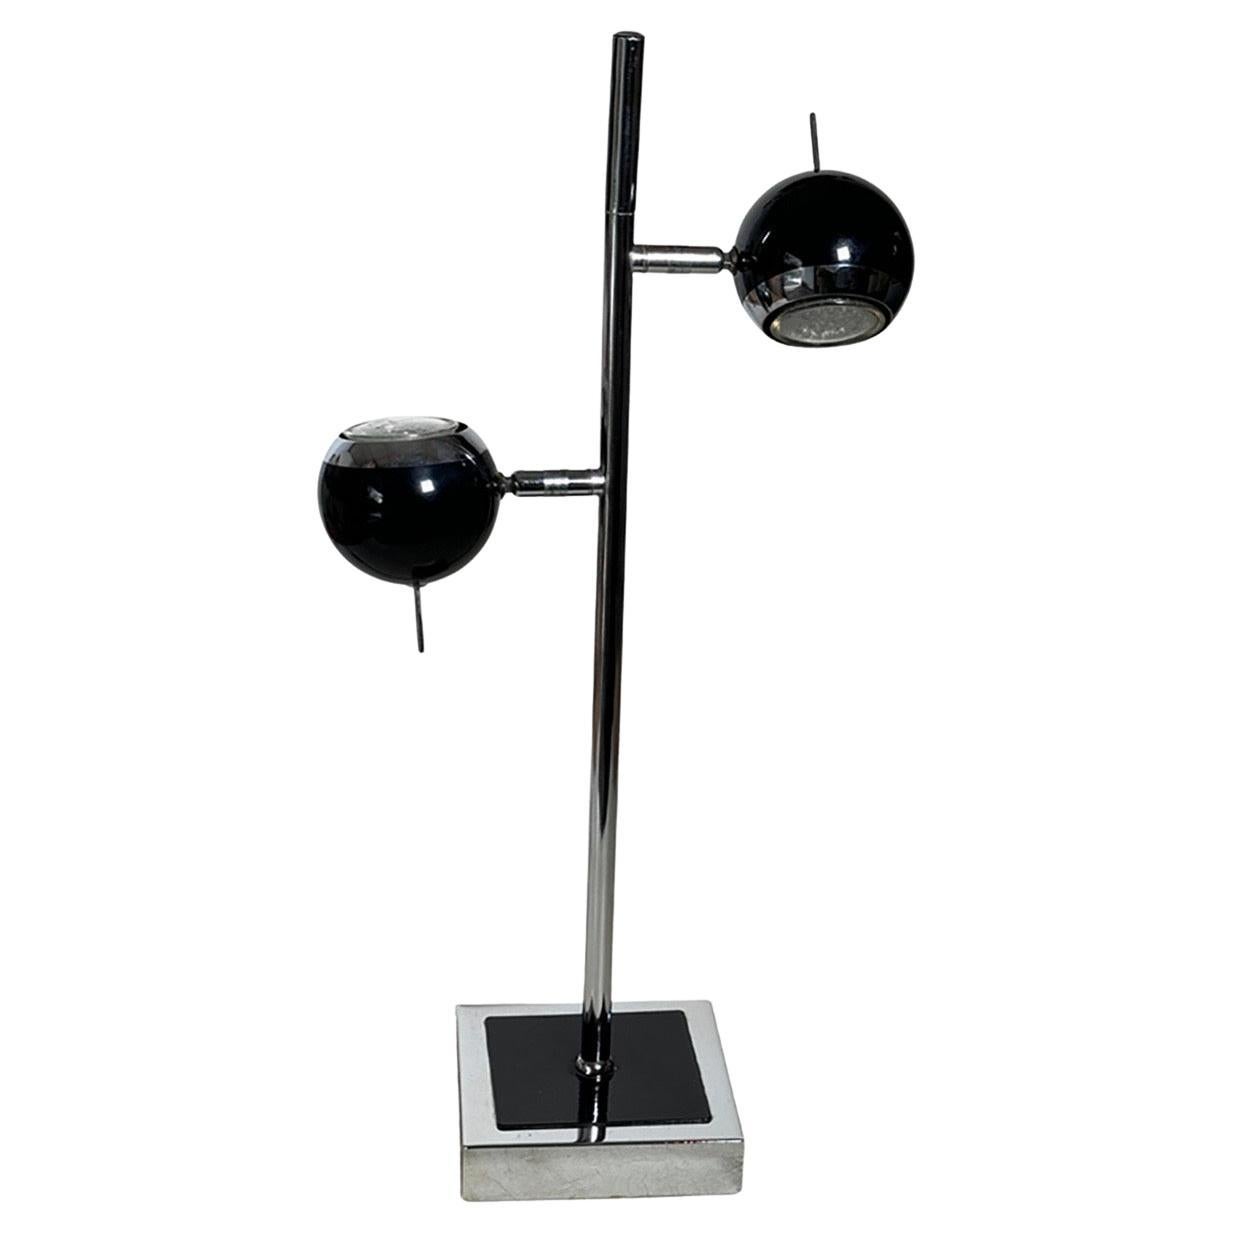  Eyeballs Table Lamp, 1980s Black and Siver Color France Removable globes